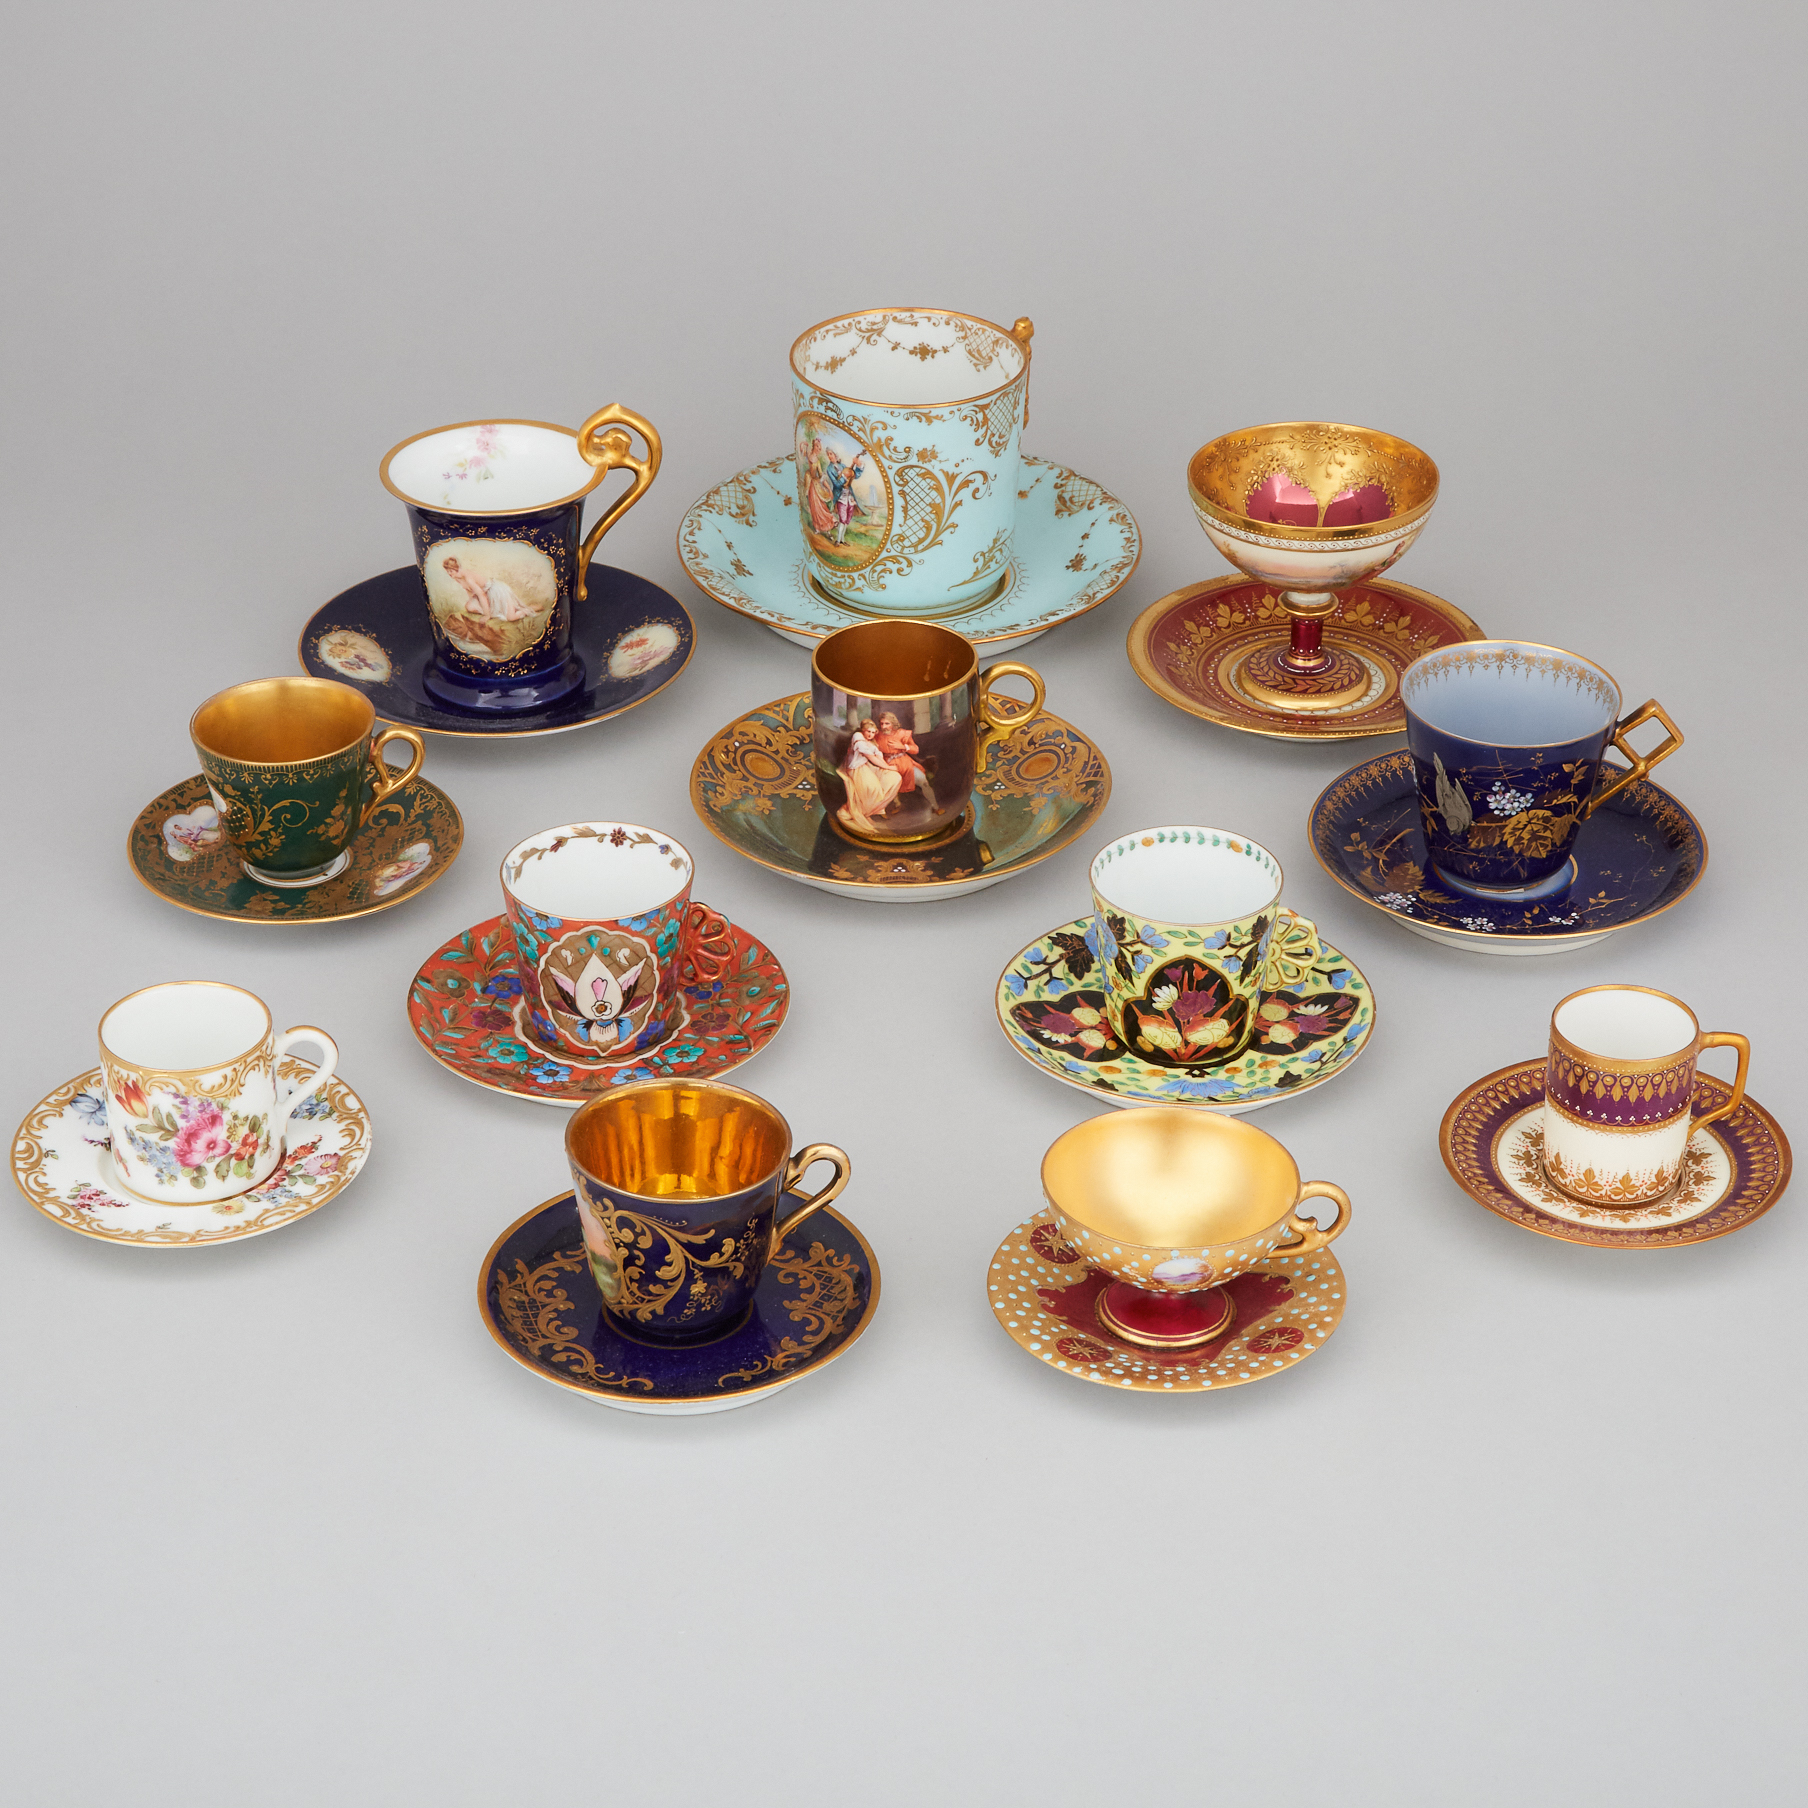 Twelve Various 'Vienna', Dresden, Berlin, Rosenthal and Other German Porcelain Cups and Saucers, early 20th century